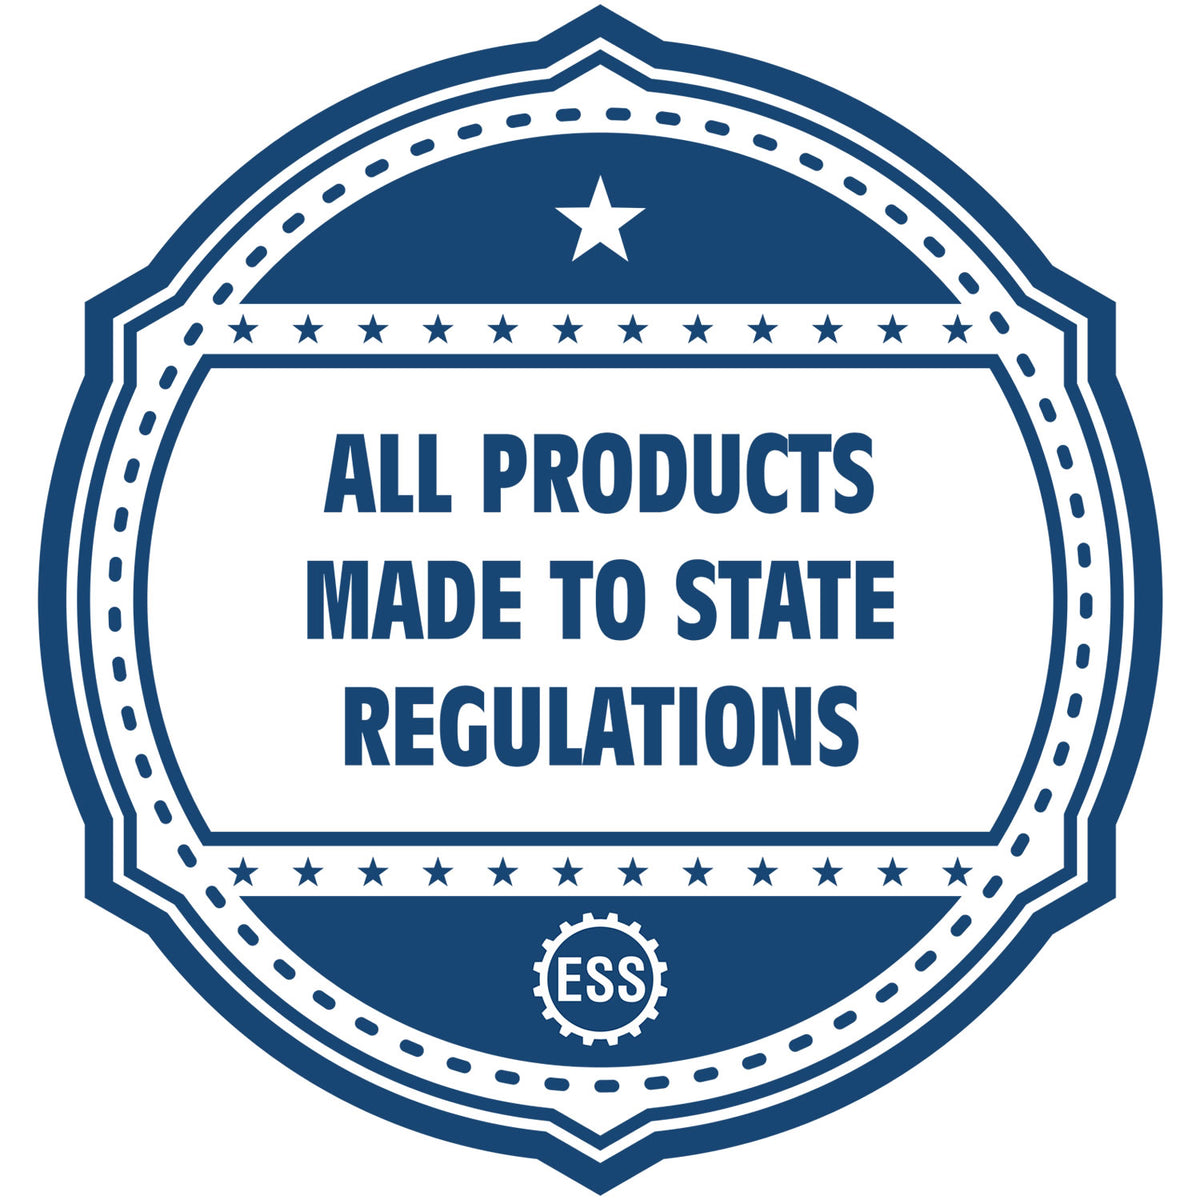 An icon or badge element for the State of Nevada Architectural Seal Embosser showing that this product is made in compliance with state regulations.